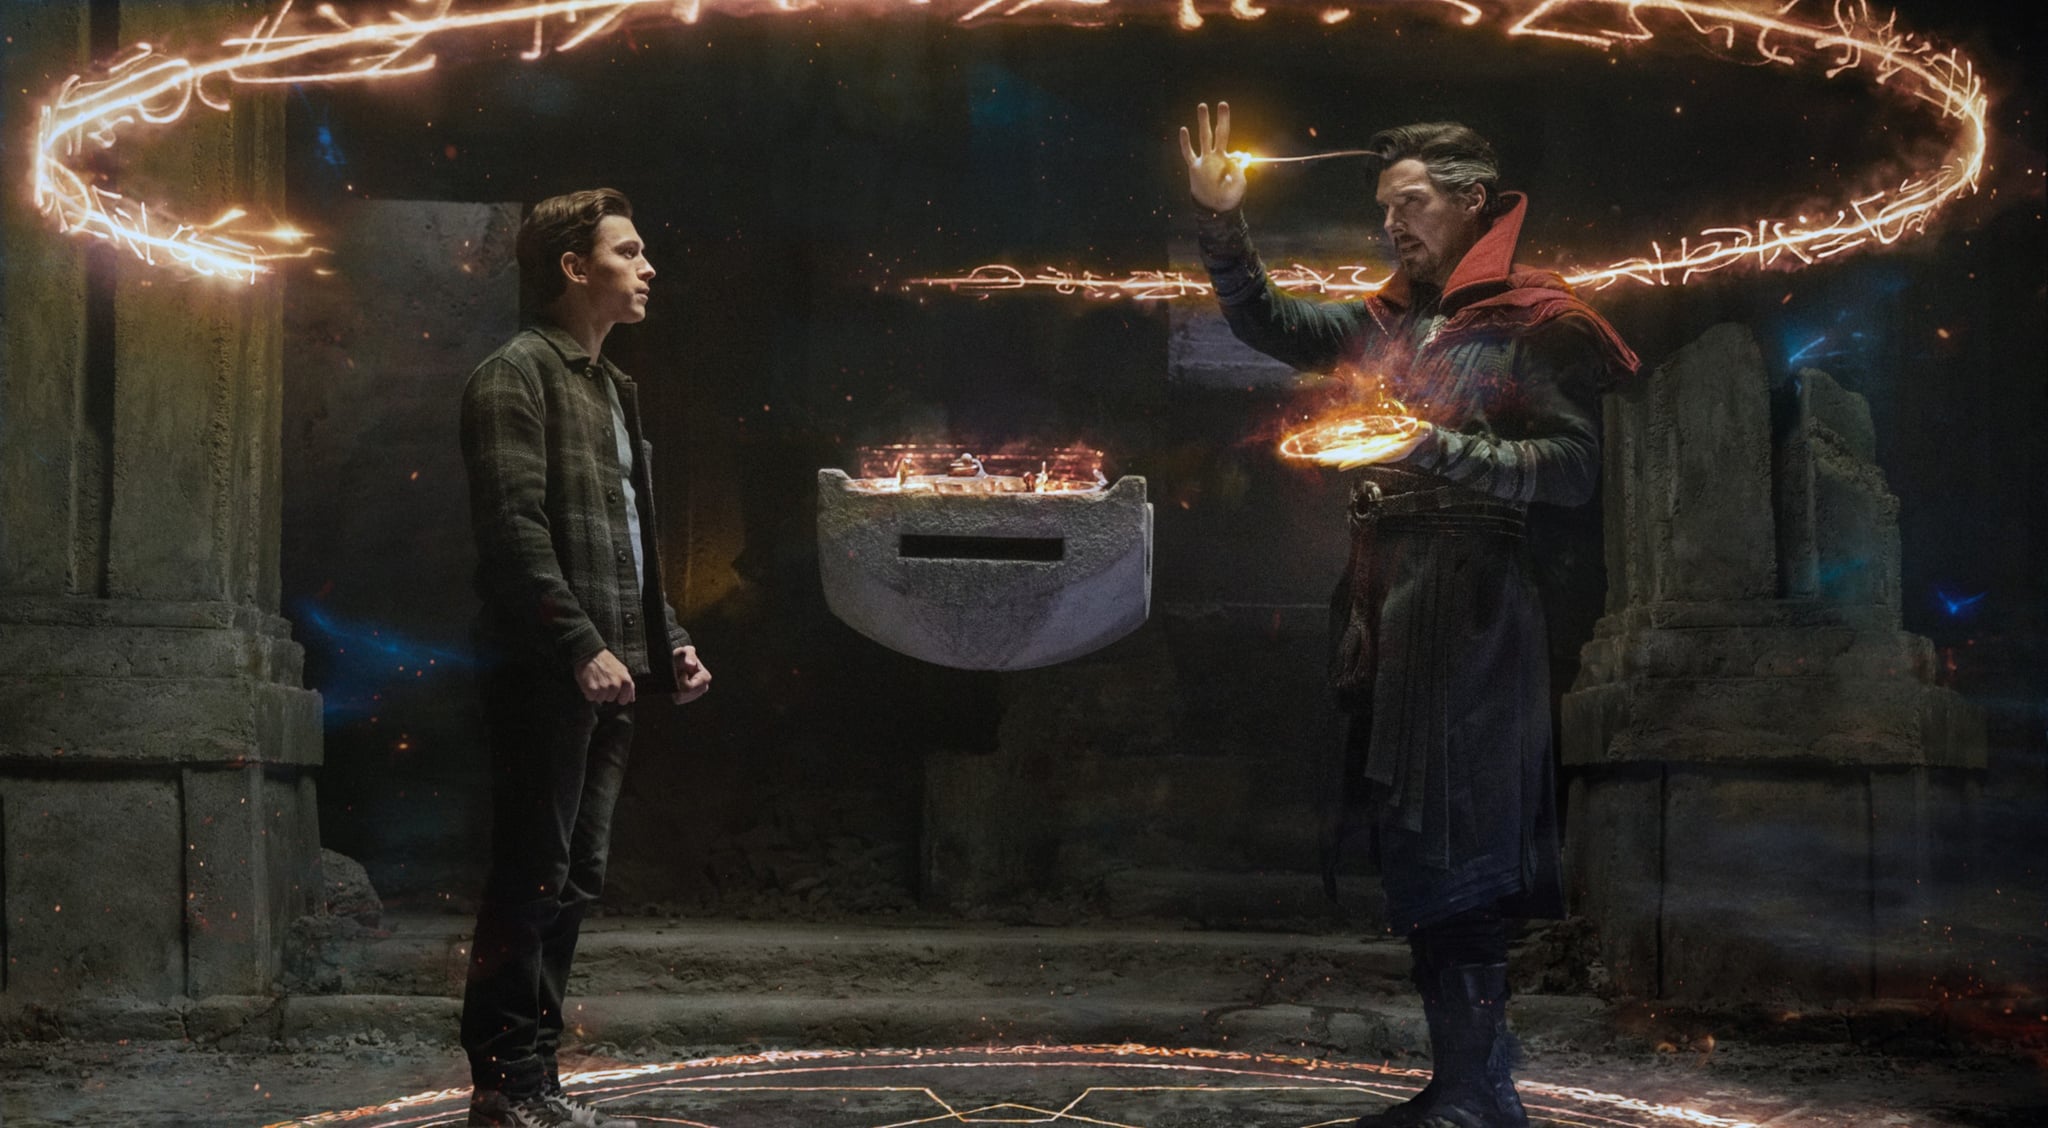 SPIDER-MAN: NO WAY HOME, from left: Tom Holland as Peter Parker, Benedict Cumberbatch as Doctor Strange, 2021. photo: Matt Kennedy / Sony Pictures Releasing / Marvel Entertainment / Courtesy Everett Collection